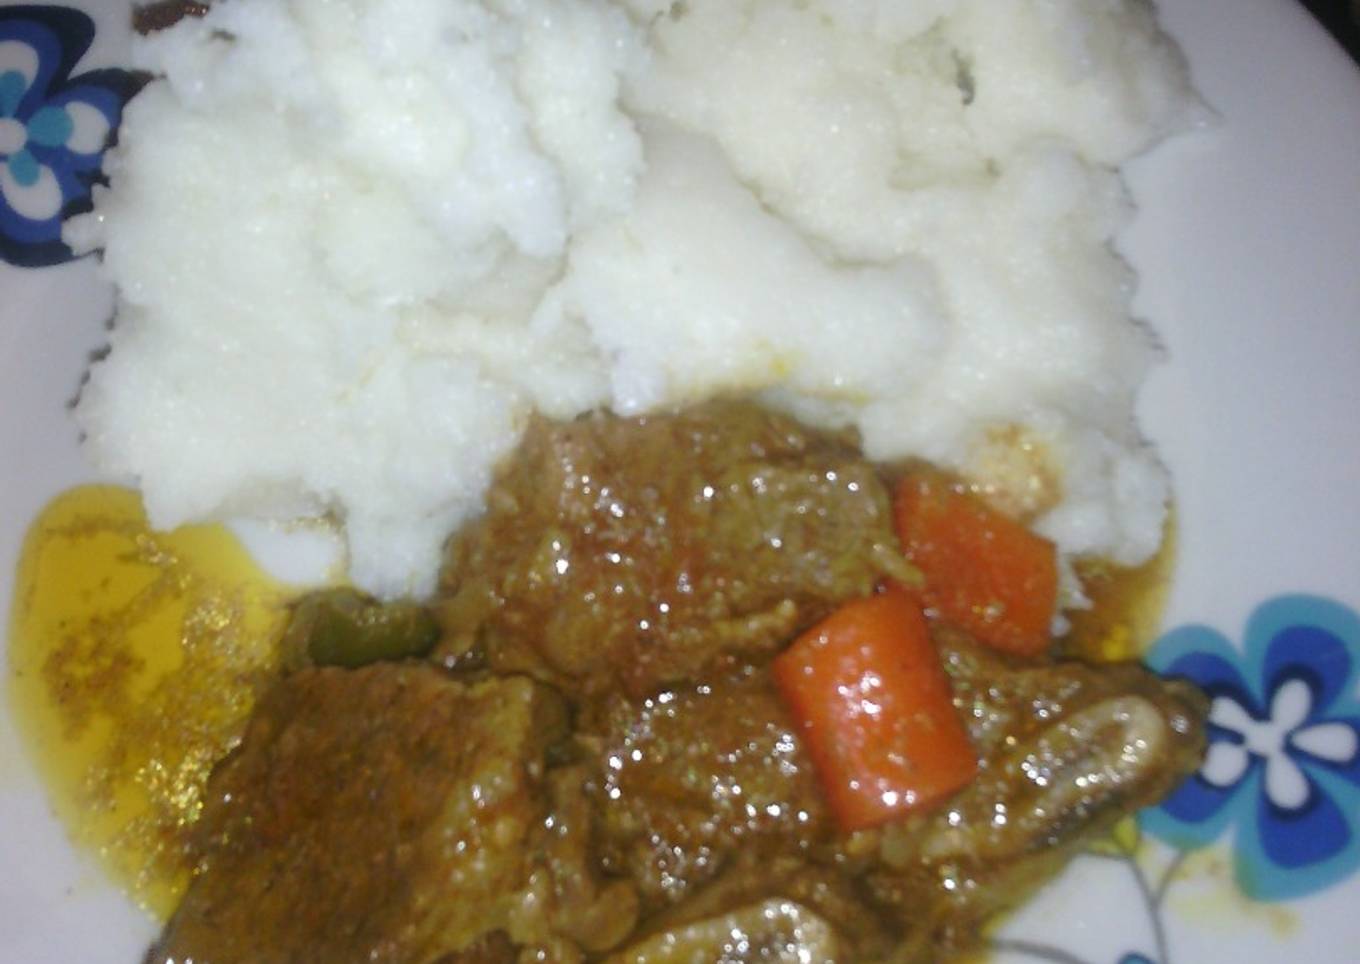 Beef stew and carrots